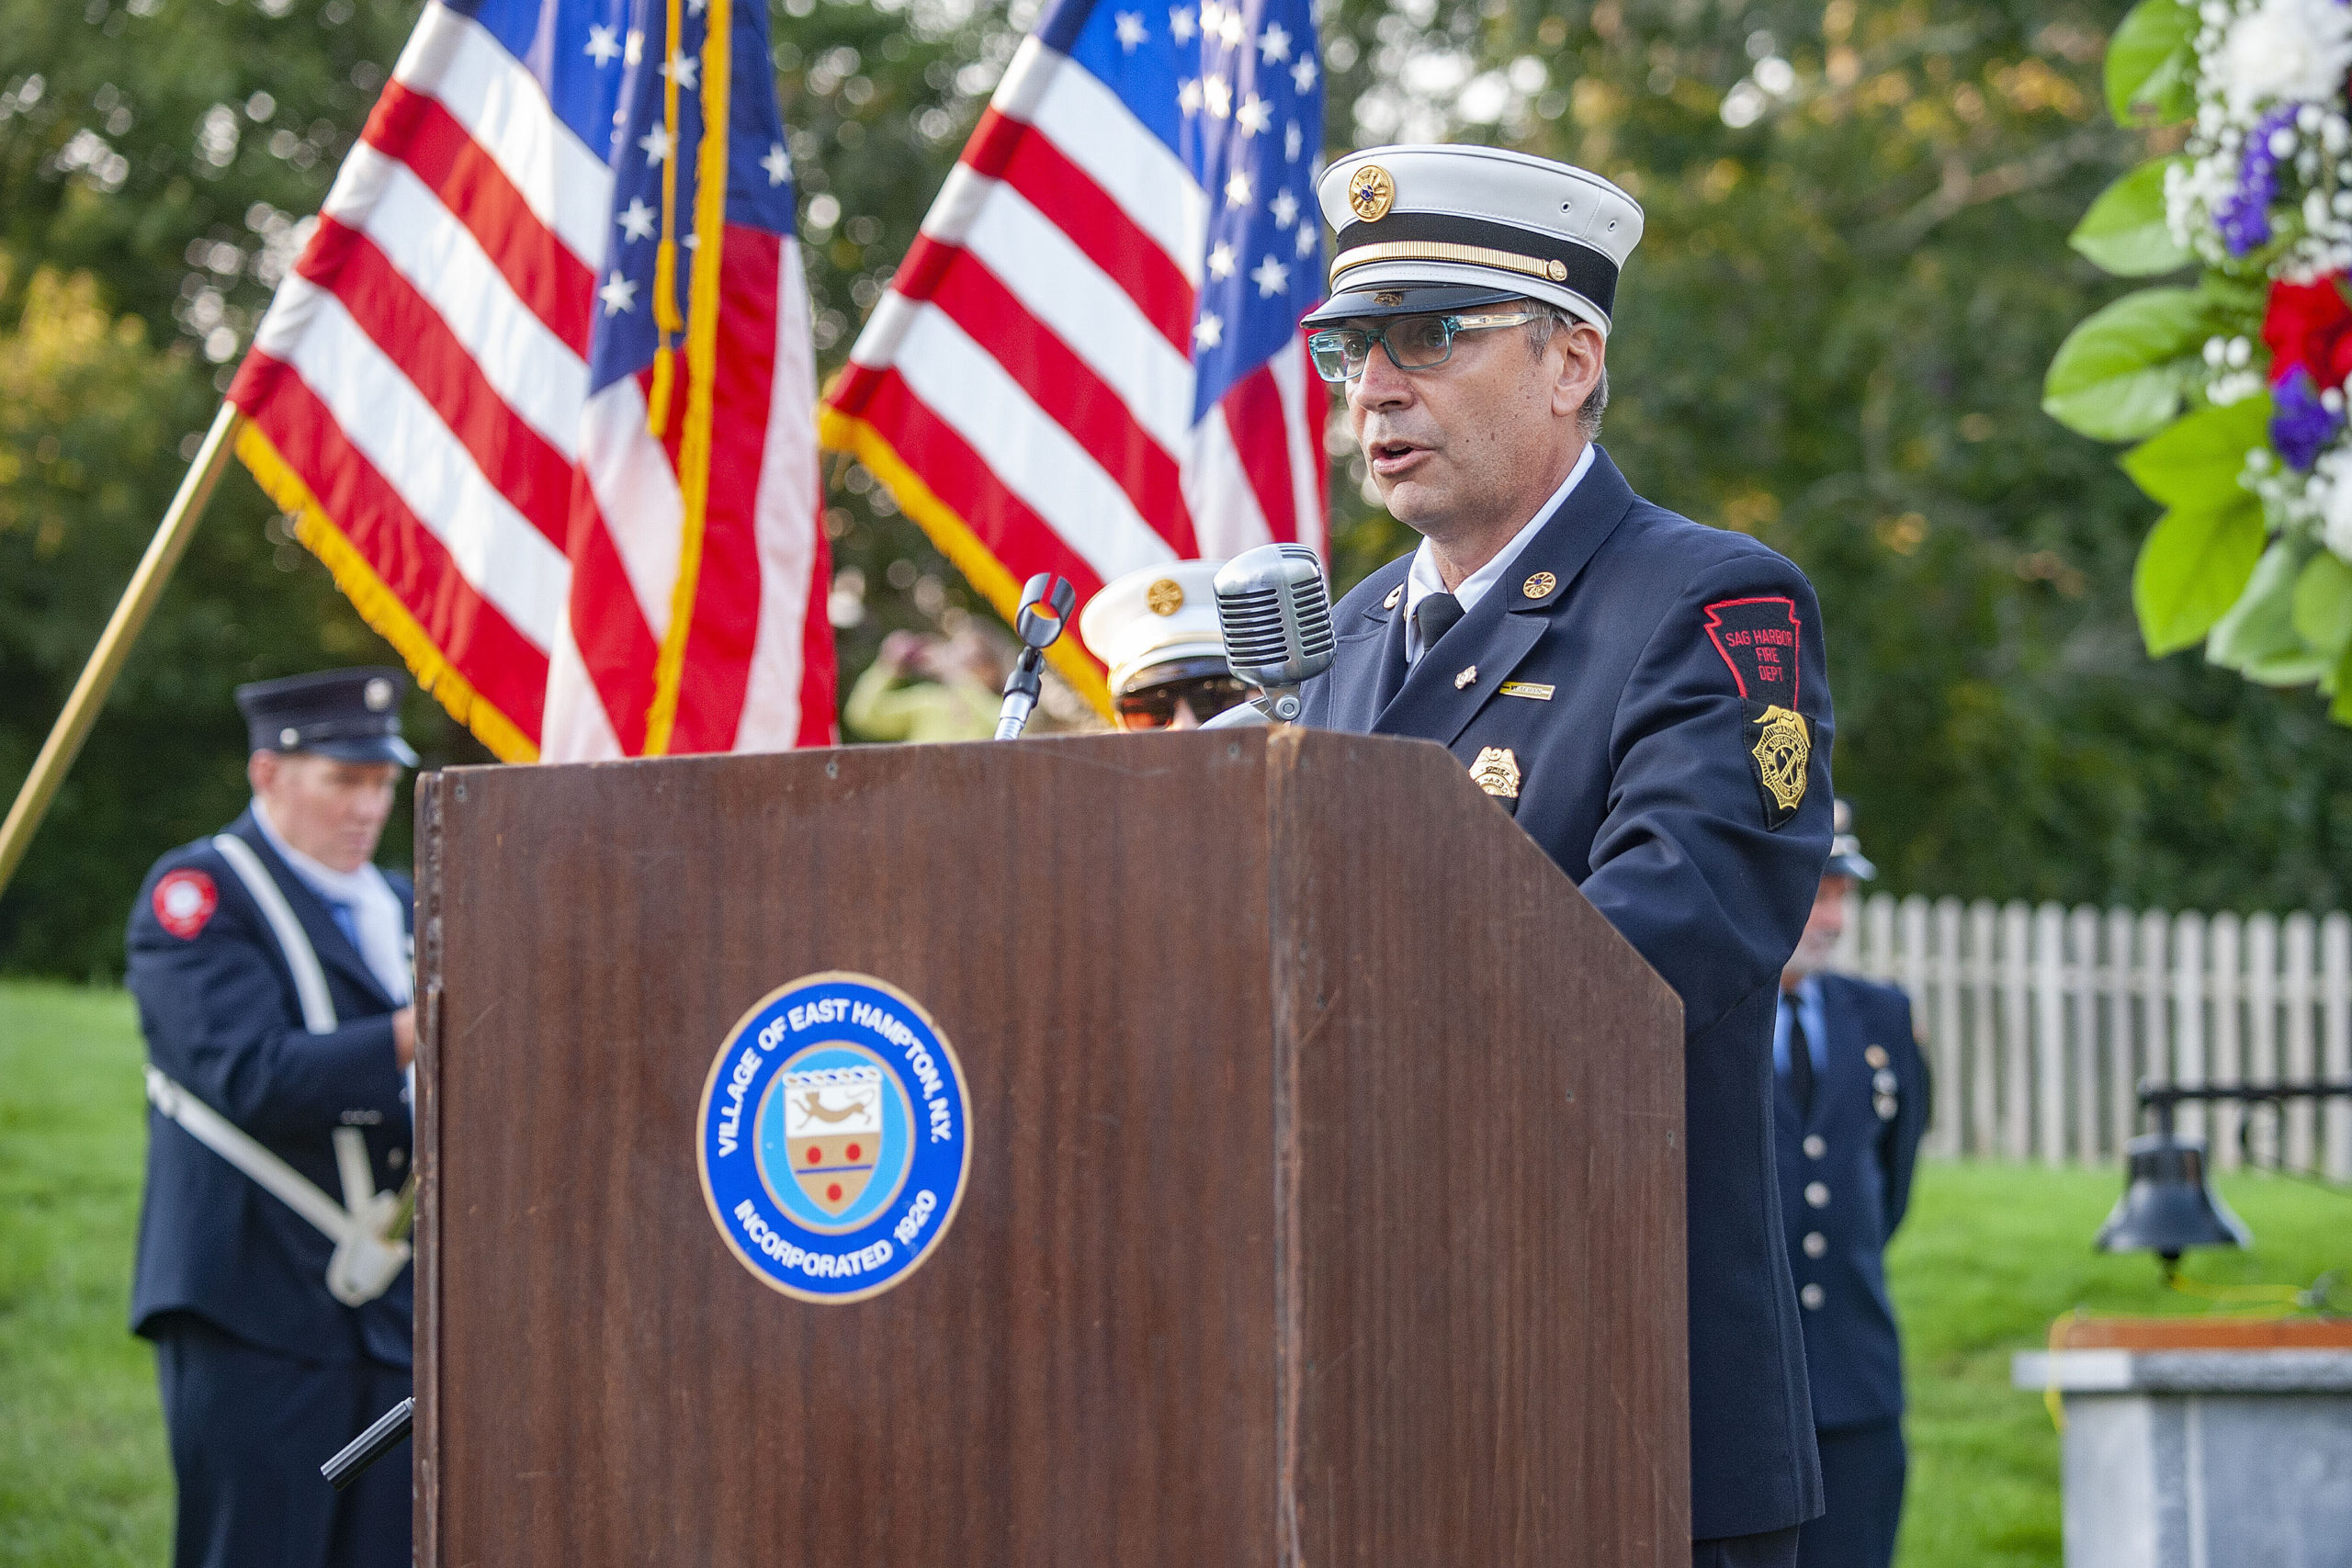 Sag Harbor Fire Department Ex-Chief Tom Gardella gave the Chaplain's address during a ceremony commemorating the 20th anniversary of the attack on the World Trade Center, held on the Village Green in East Hampton and attended by 11 different East End fire, police and EMS agencies on Saturday afternoon.